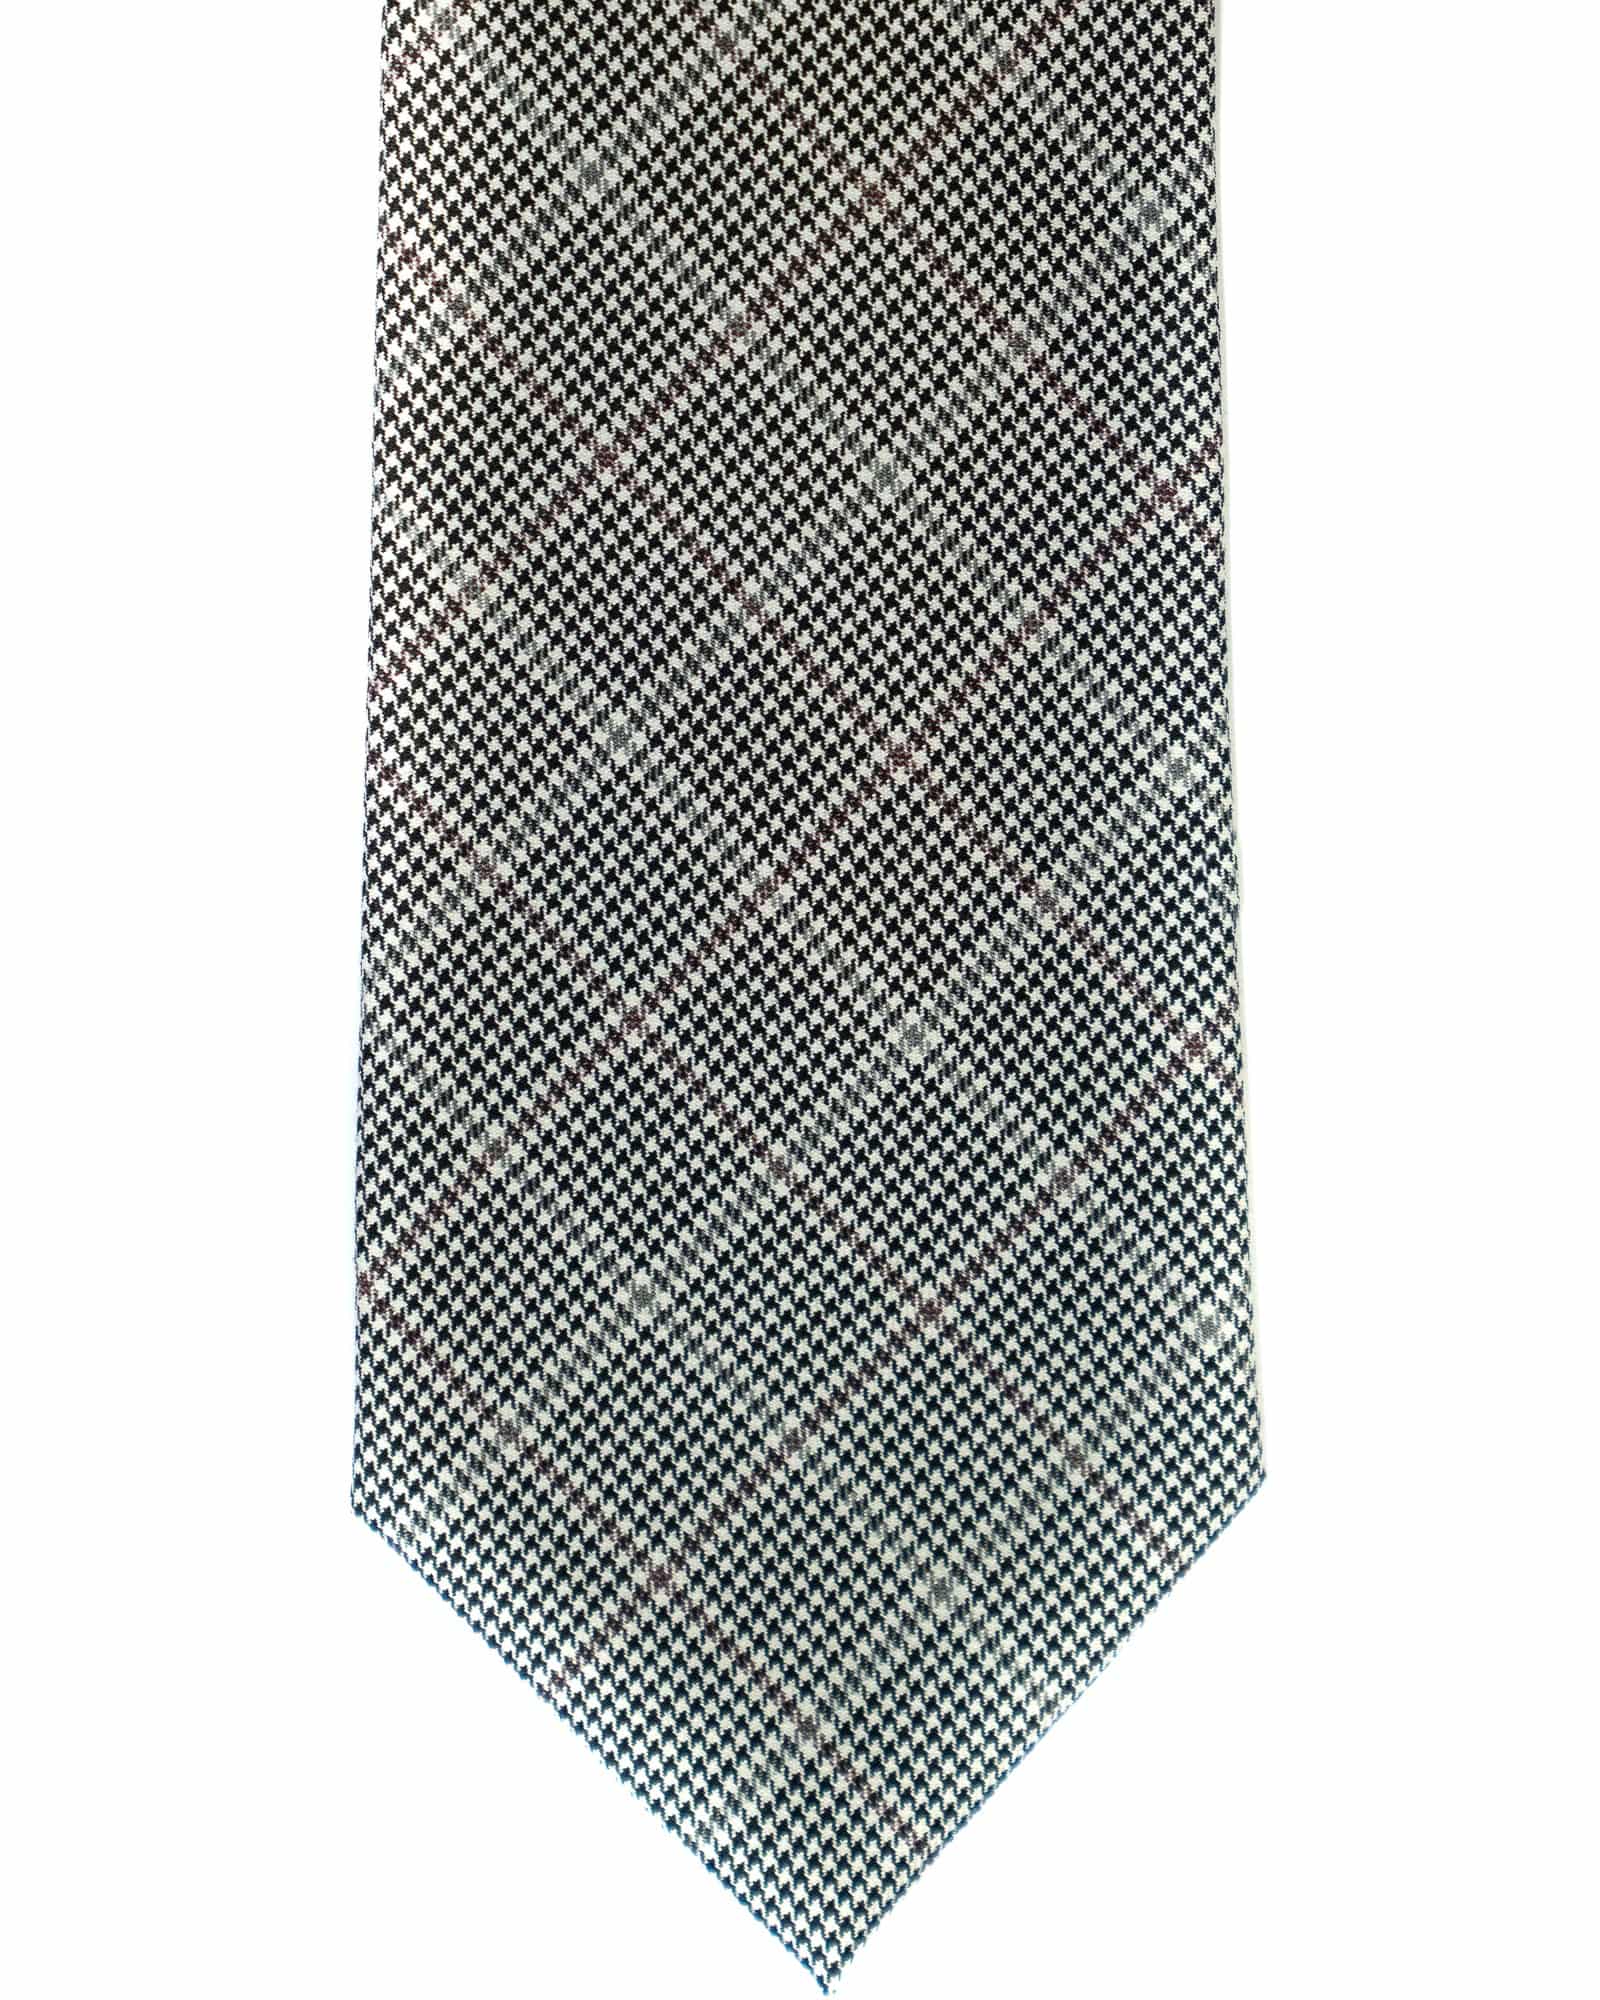 Silk And Wool Tie In  Black And White Small Houndstooth Check - Rainwater's Men's Clothing and Tuxedo Rental